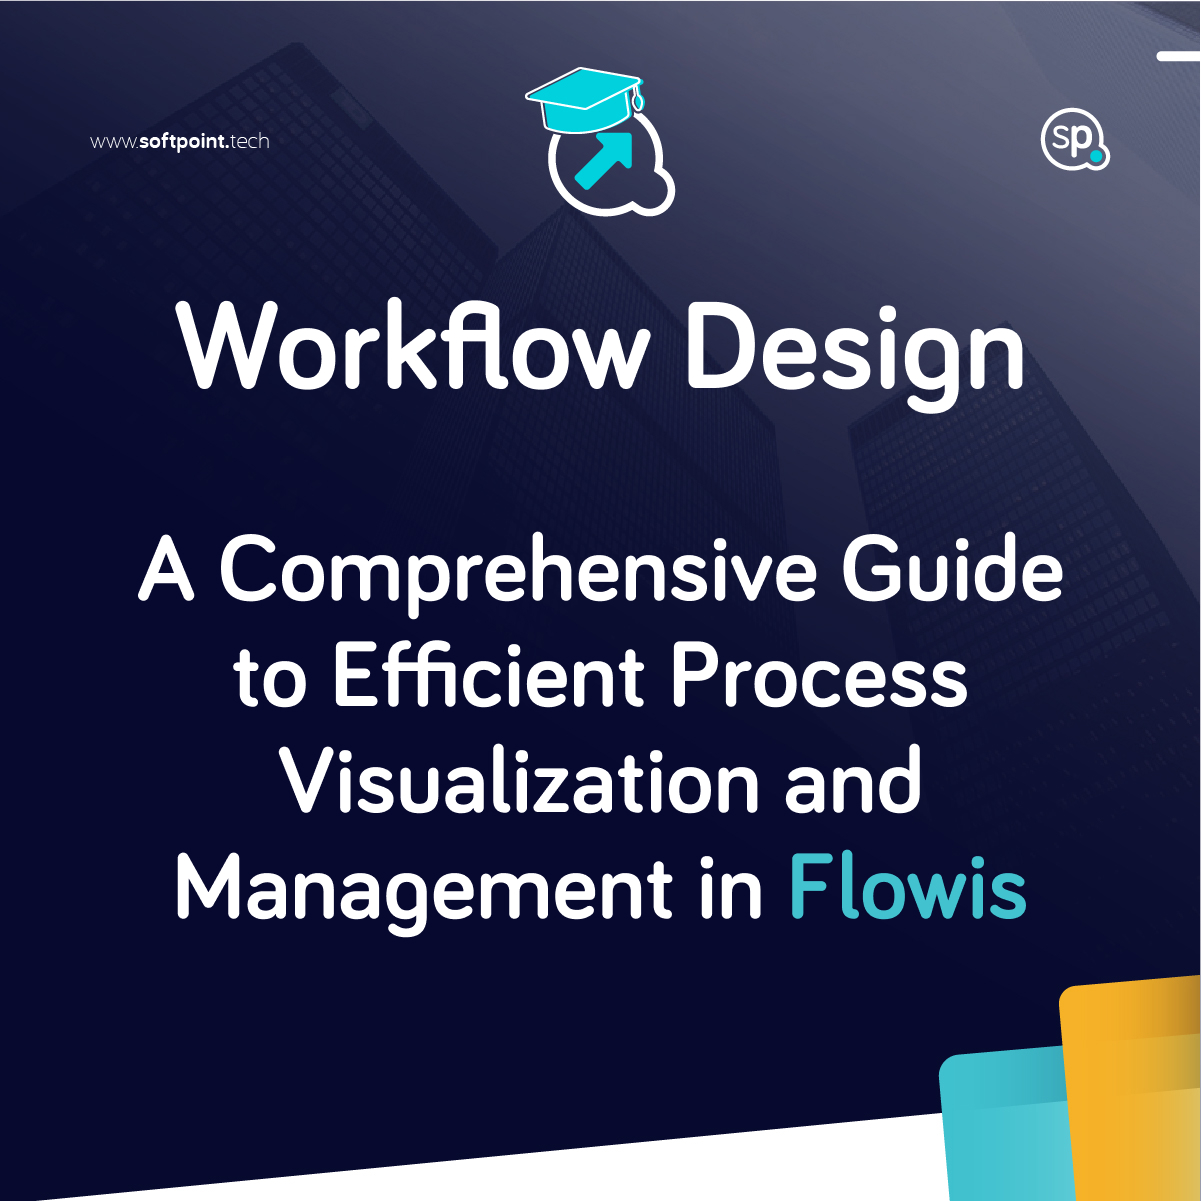 Workflow Design – A Comprehensive Guide to Efficient Process Visualization and Management